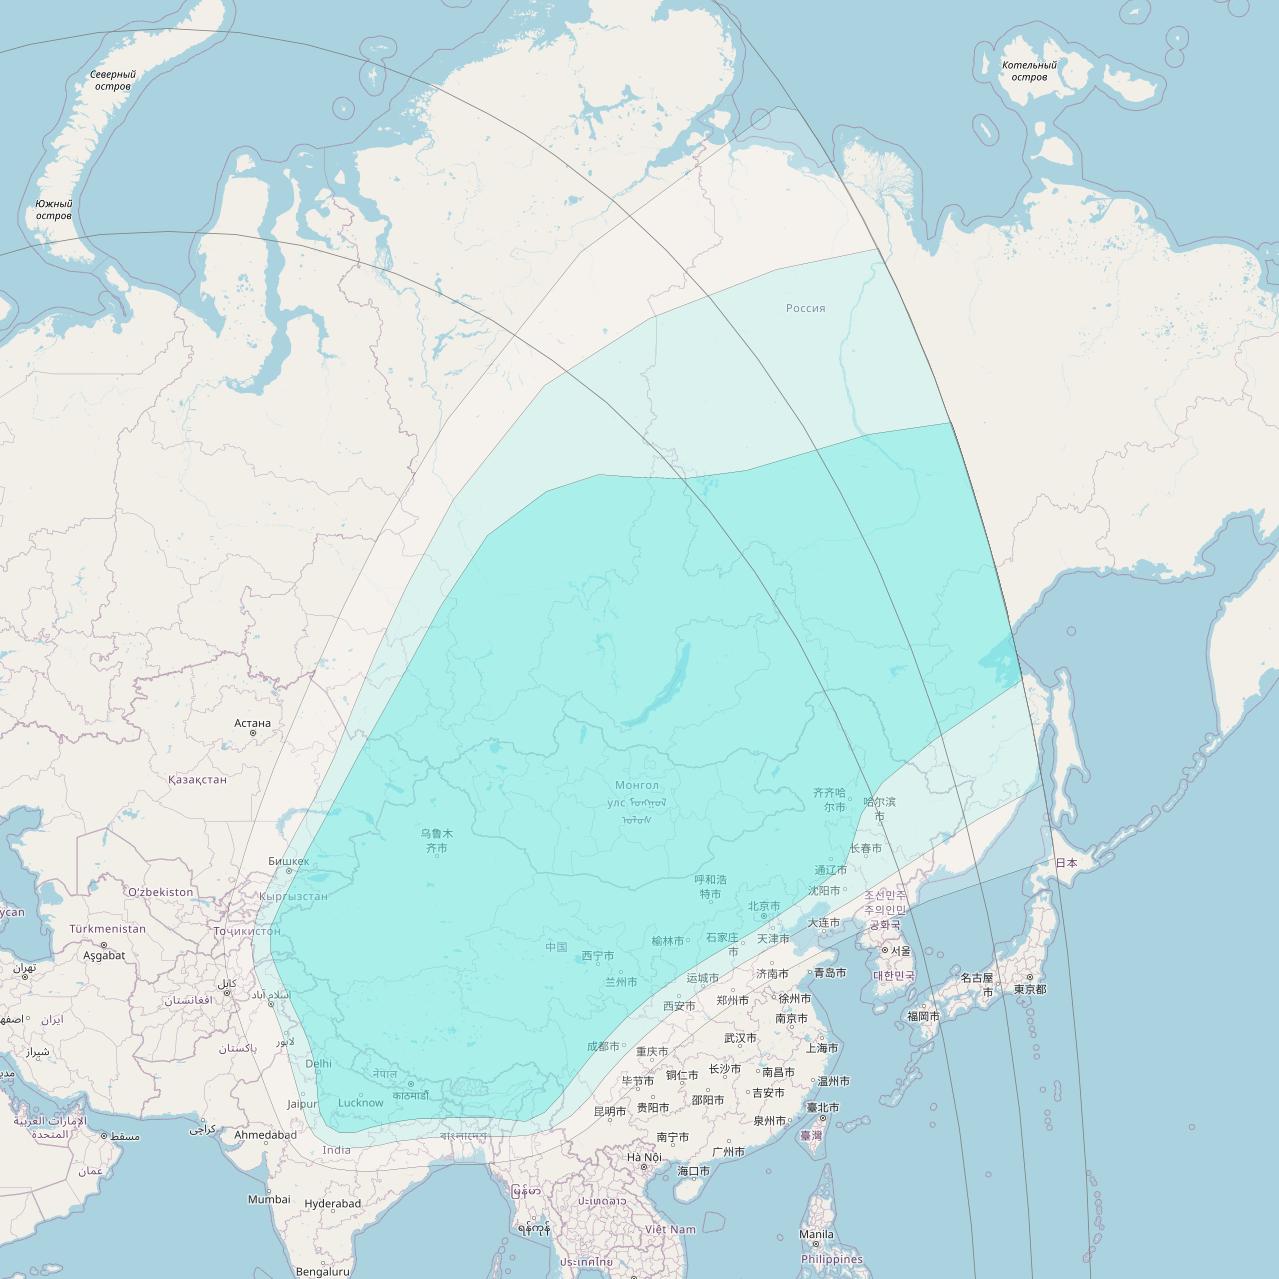 Inmarsat-4F2 at 64° E downlink L-band R007 Regional Spot beam coverage map